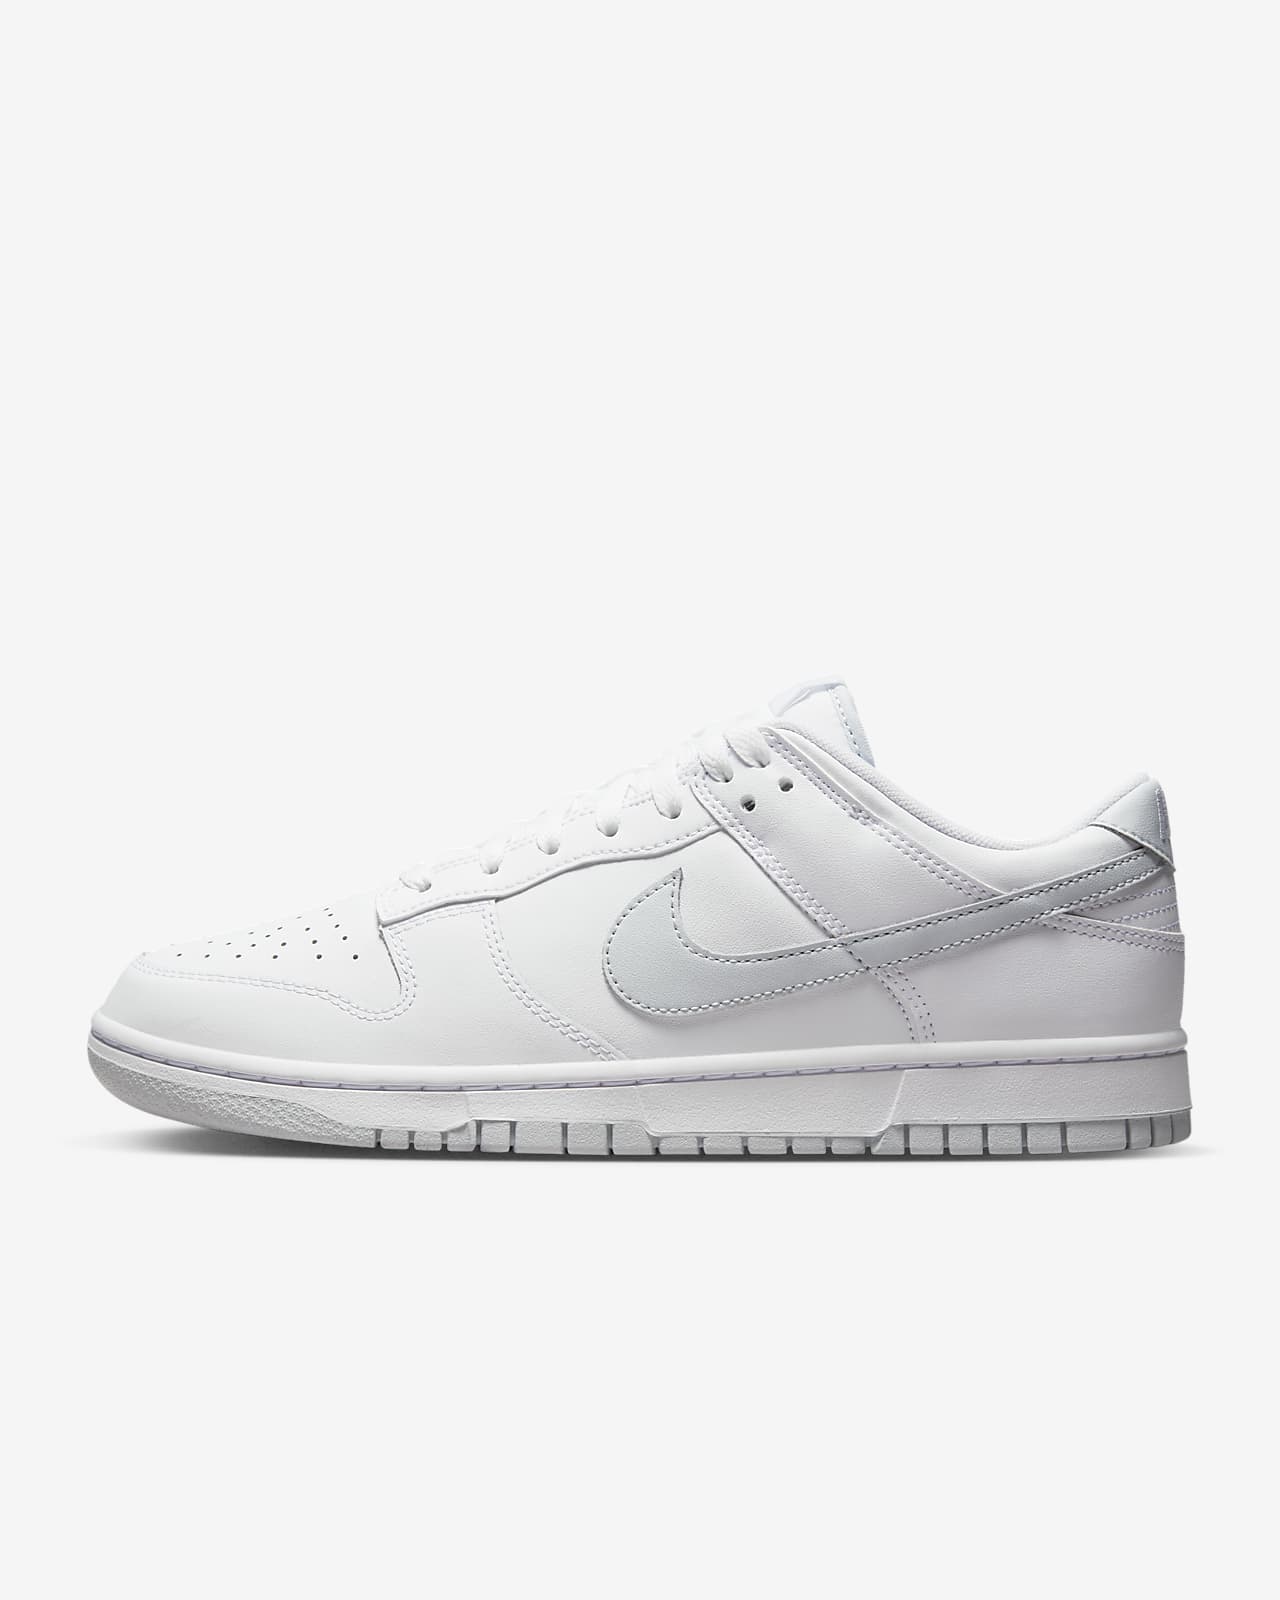 Nike Dunk Low Shoes.